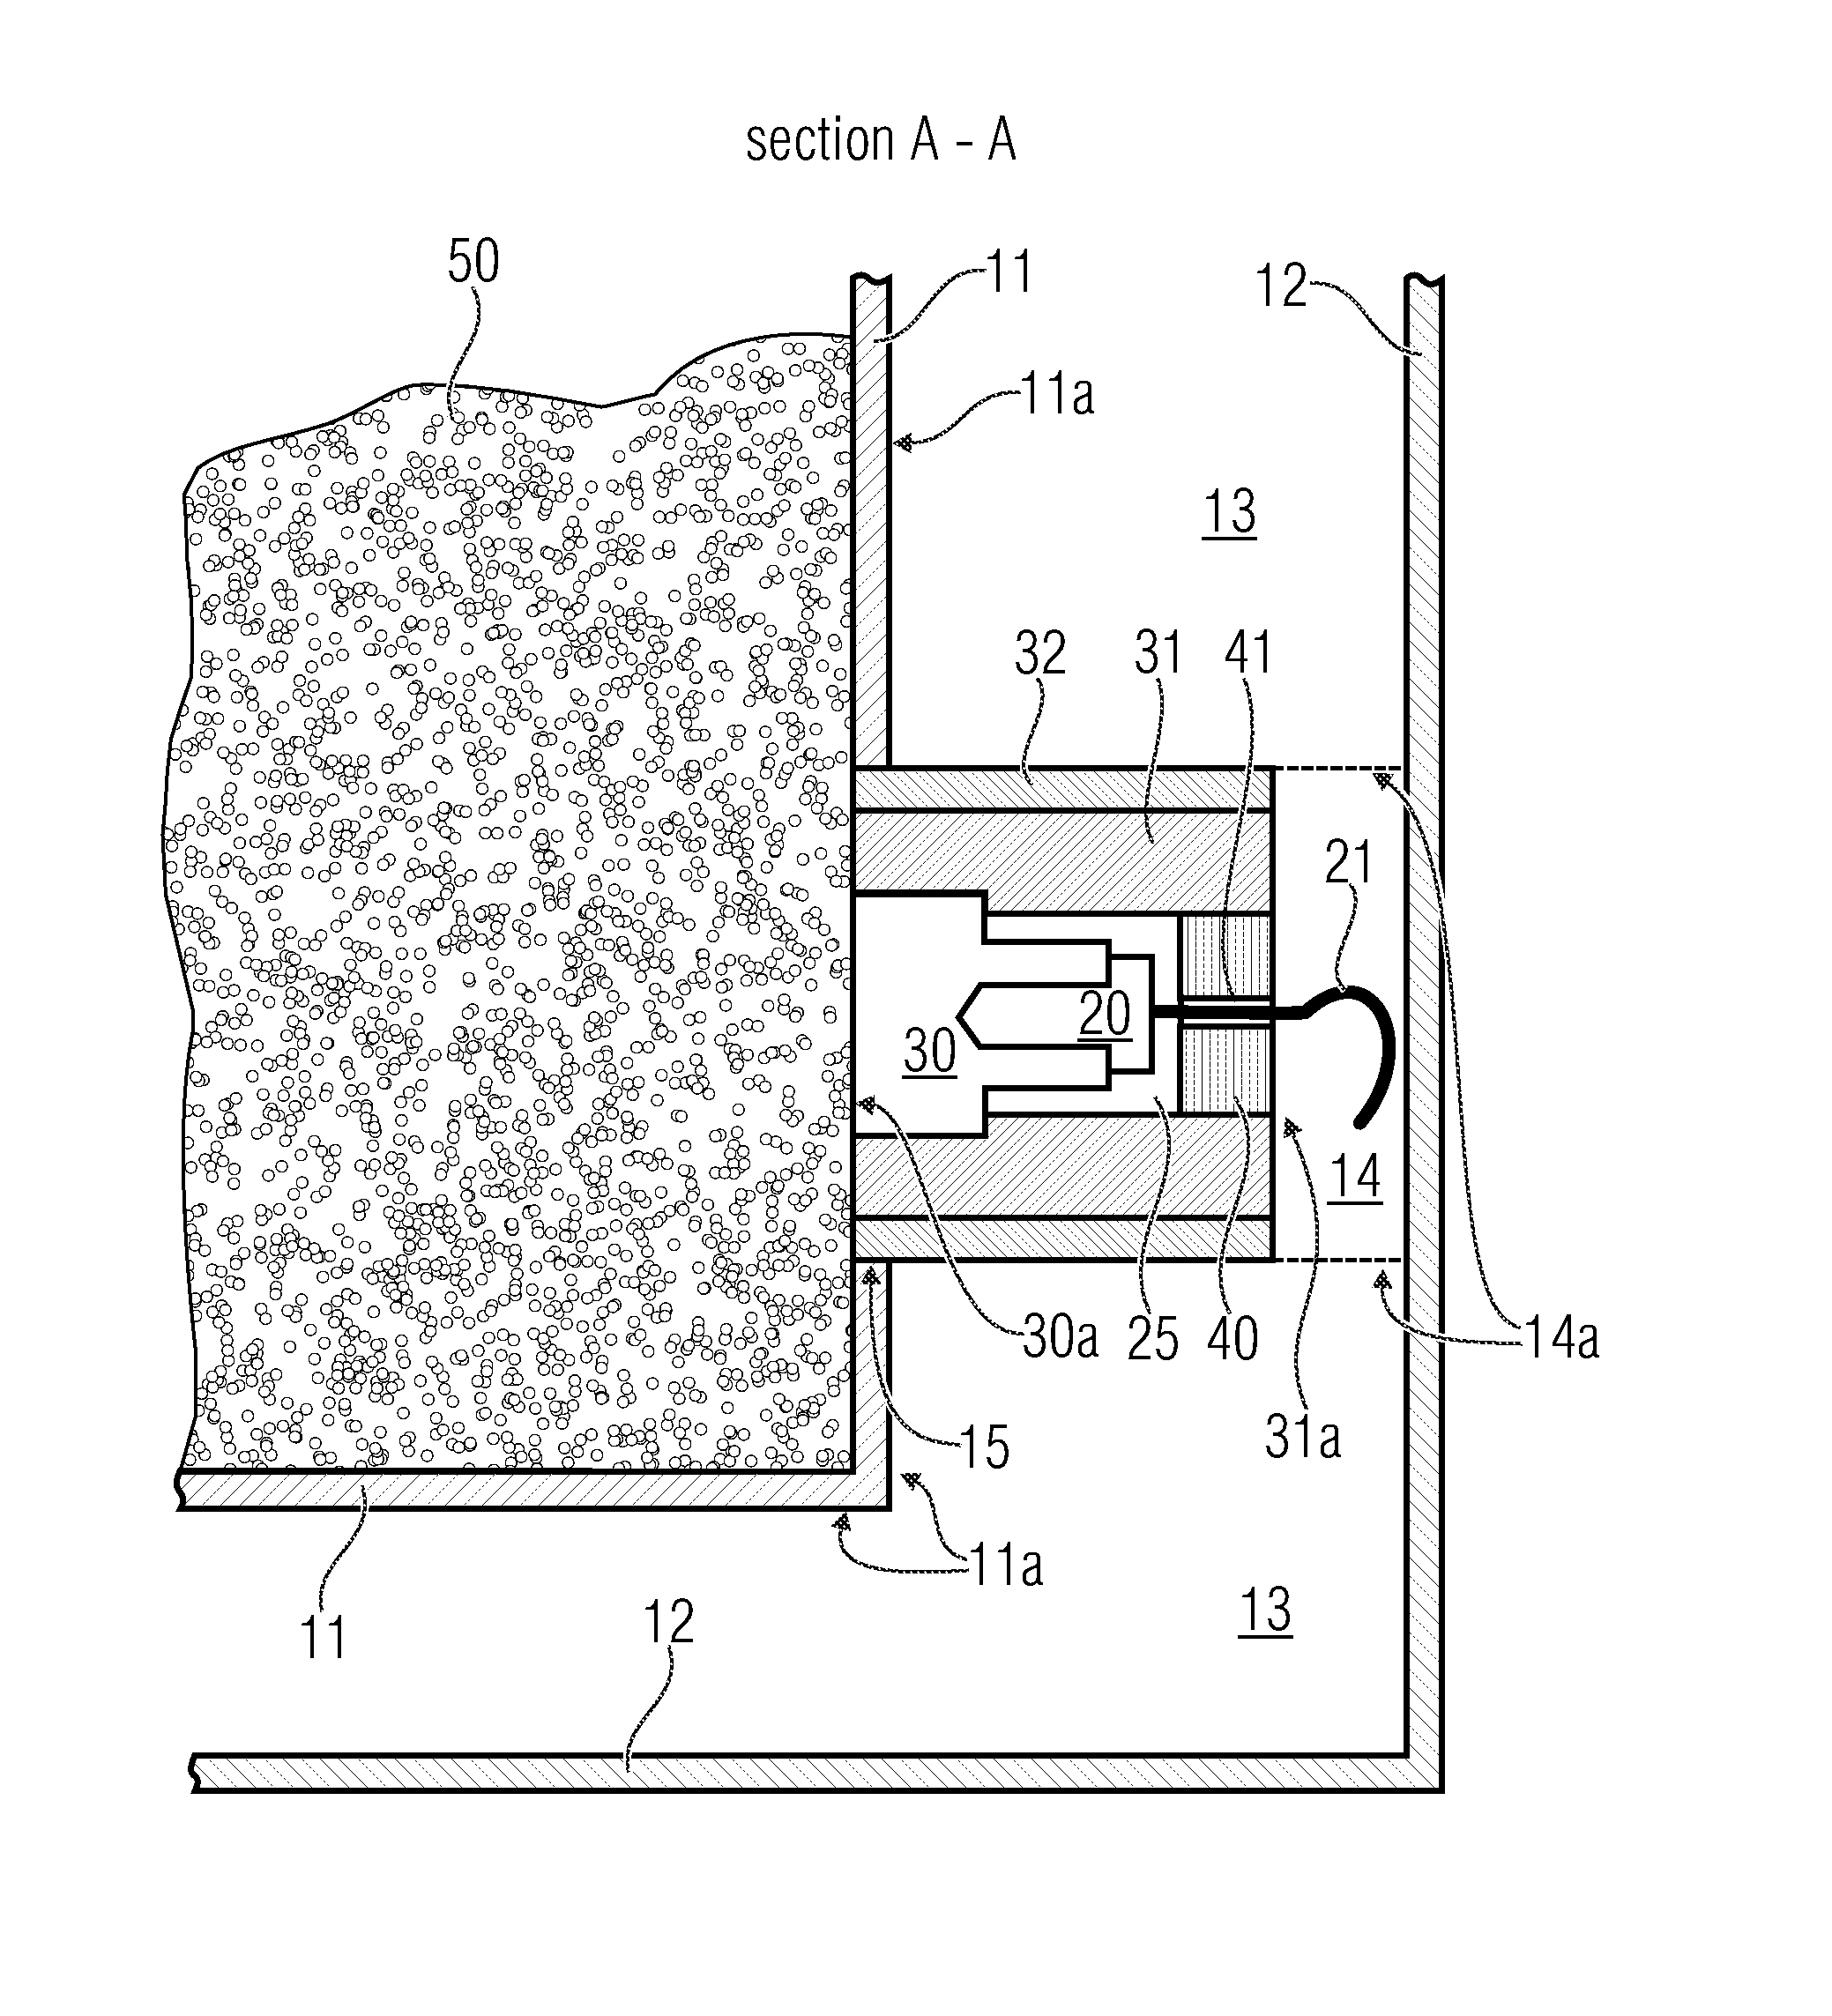 Temperature measuring device and transport vehicle skip